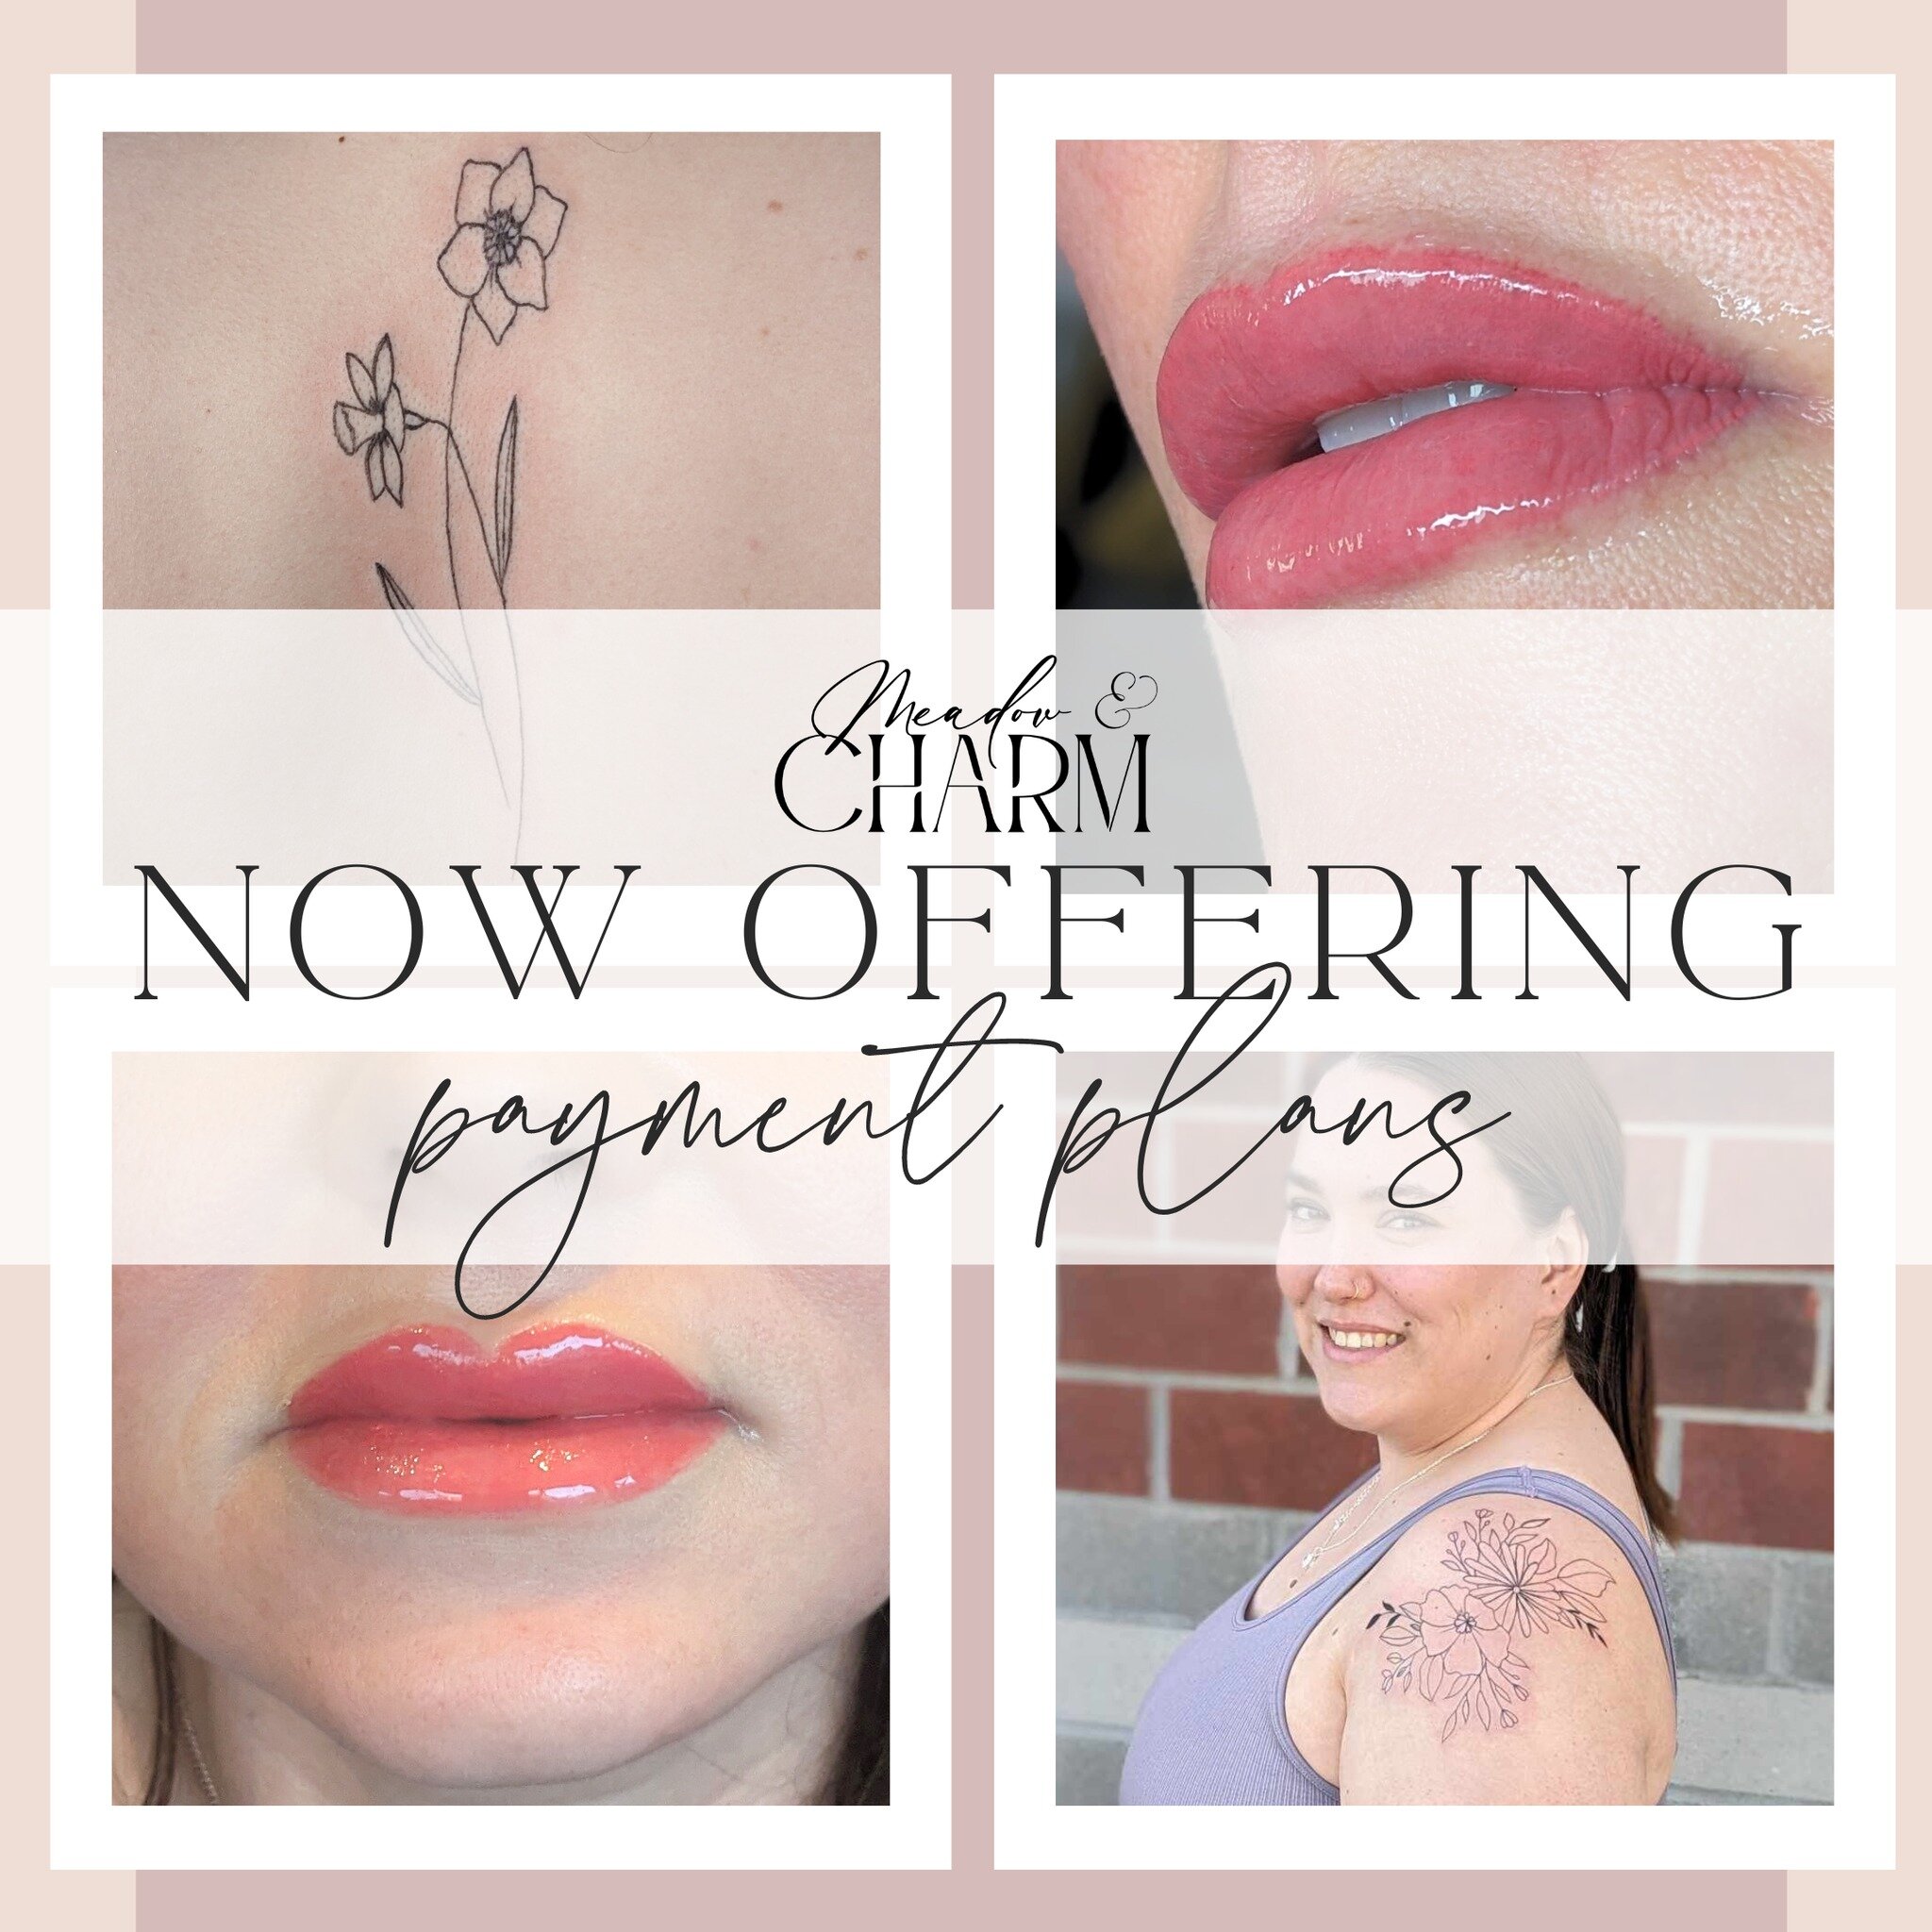 We are excited to announce we are now offering payment plans for permanent makeup and larger tattoos. Check it out here:
https://pay.withcherry.com/meadow-and-charm-llc